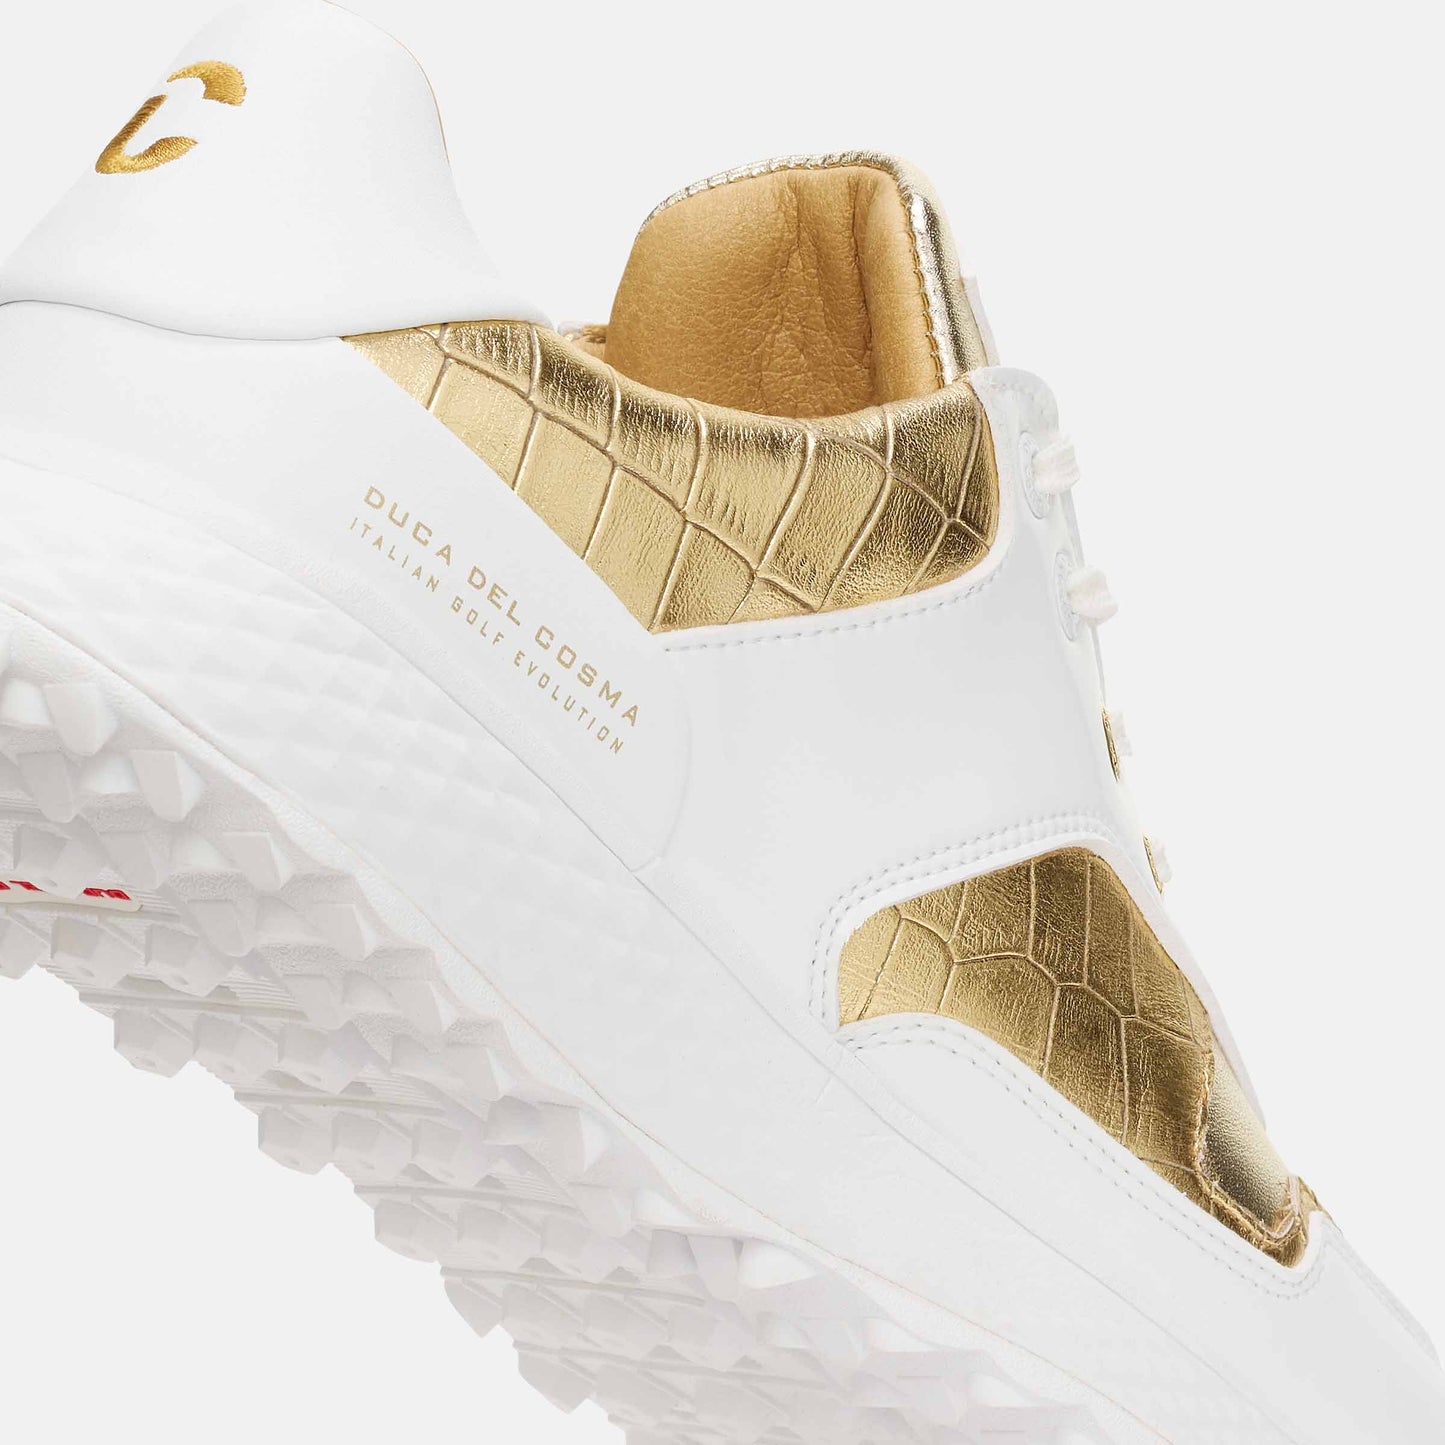 White Golf Shoes, Ultra-Lightweight, Gold Golf Shoes, Spikeless Golf Shoes, Waterproof Golf Shoes, Lightweight Golf Shoes, Duca del Cosma Women's Golf Shoes, Sneaker golf shoes.